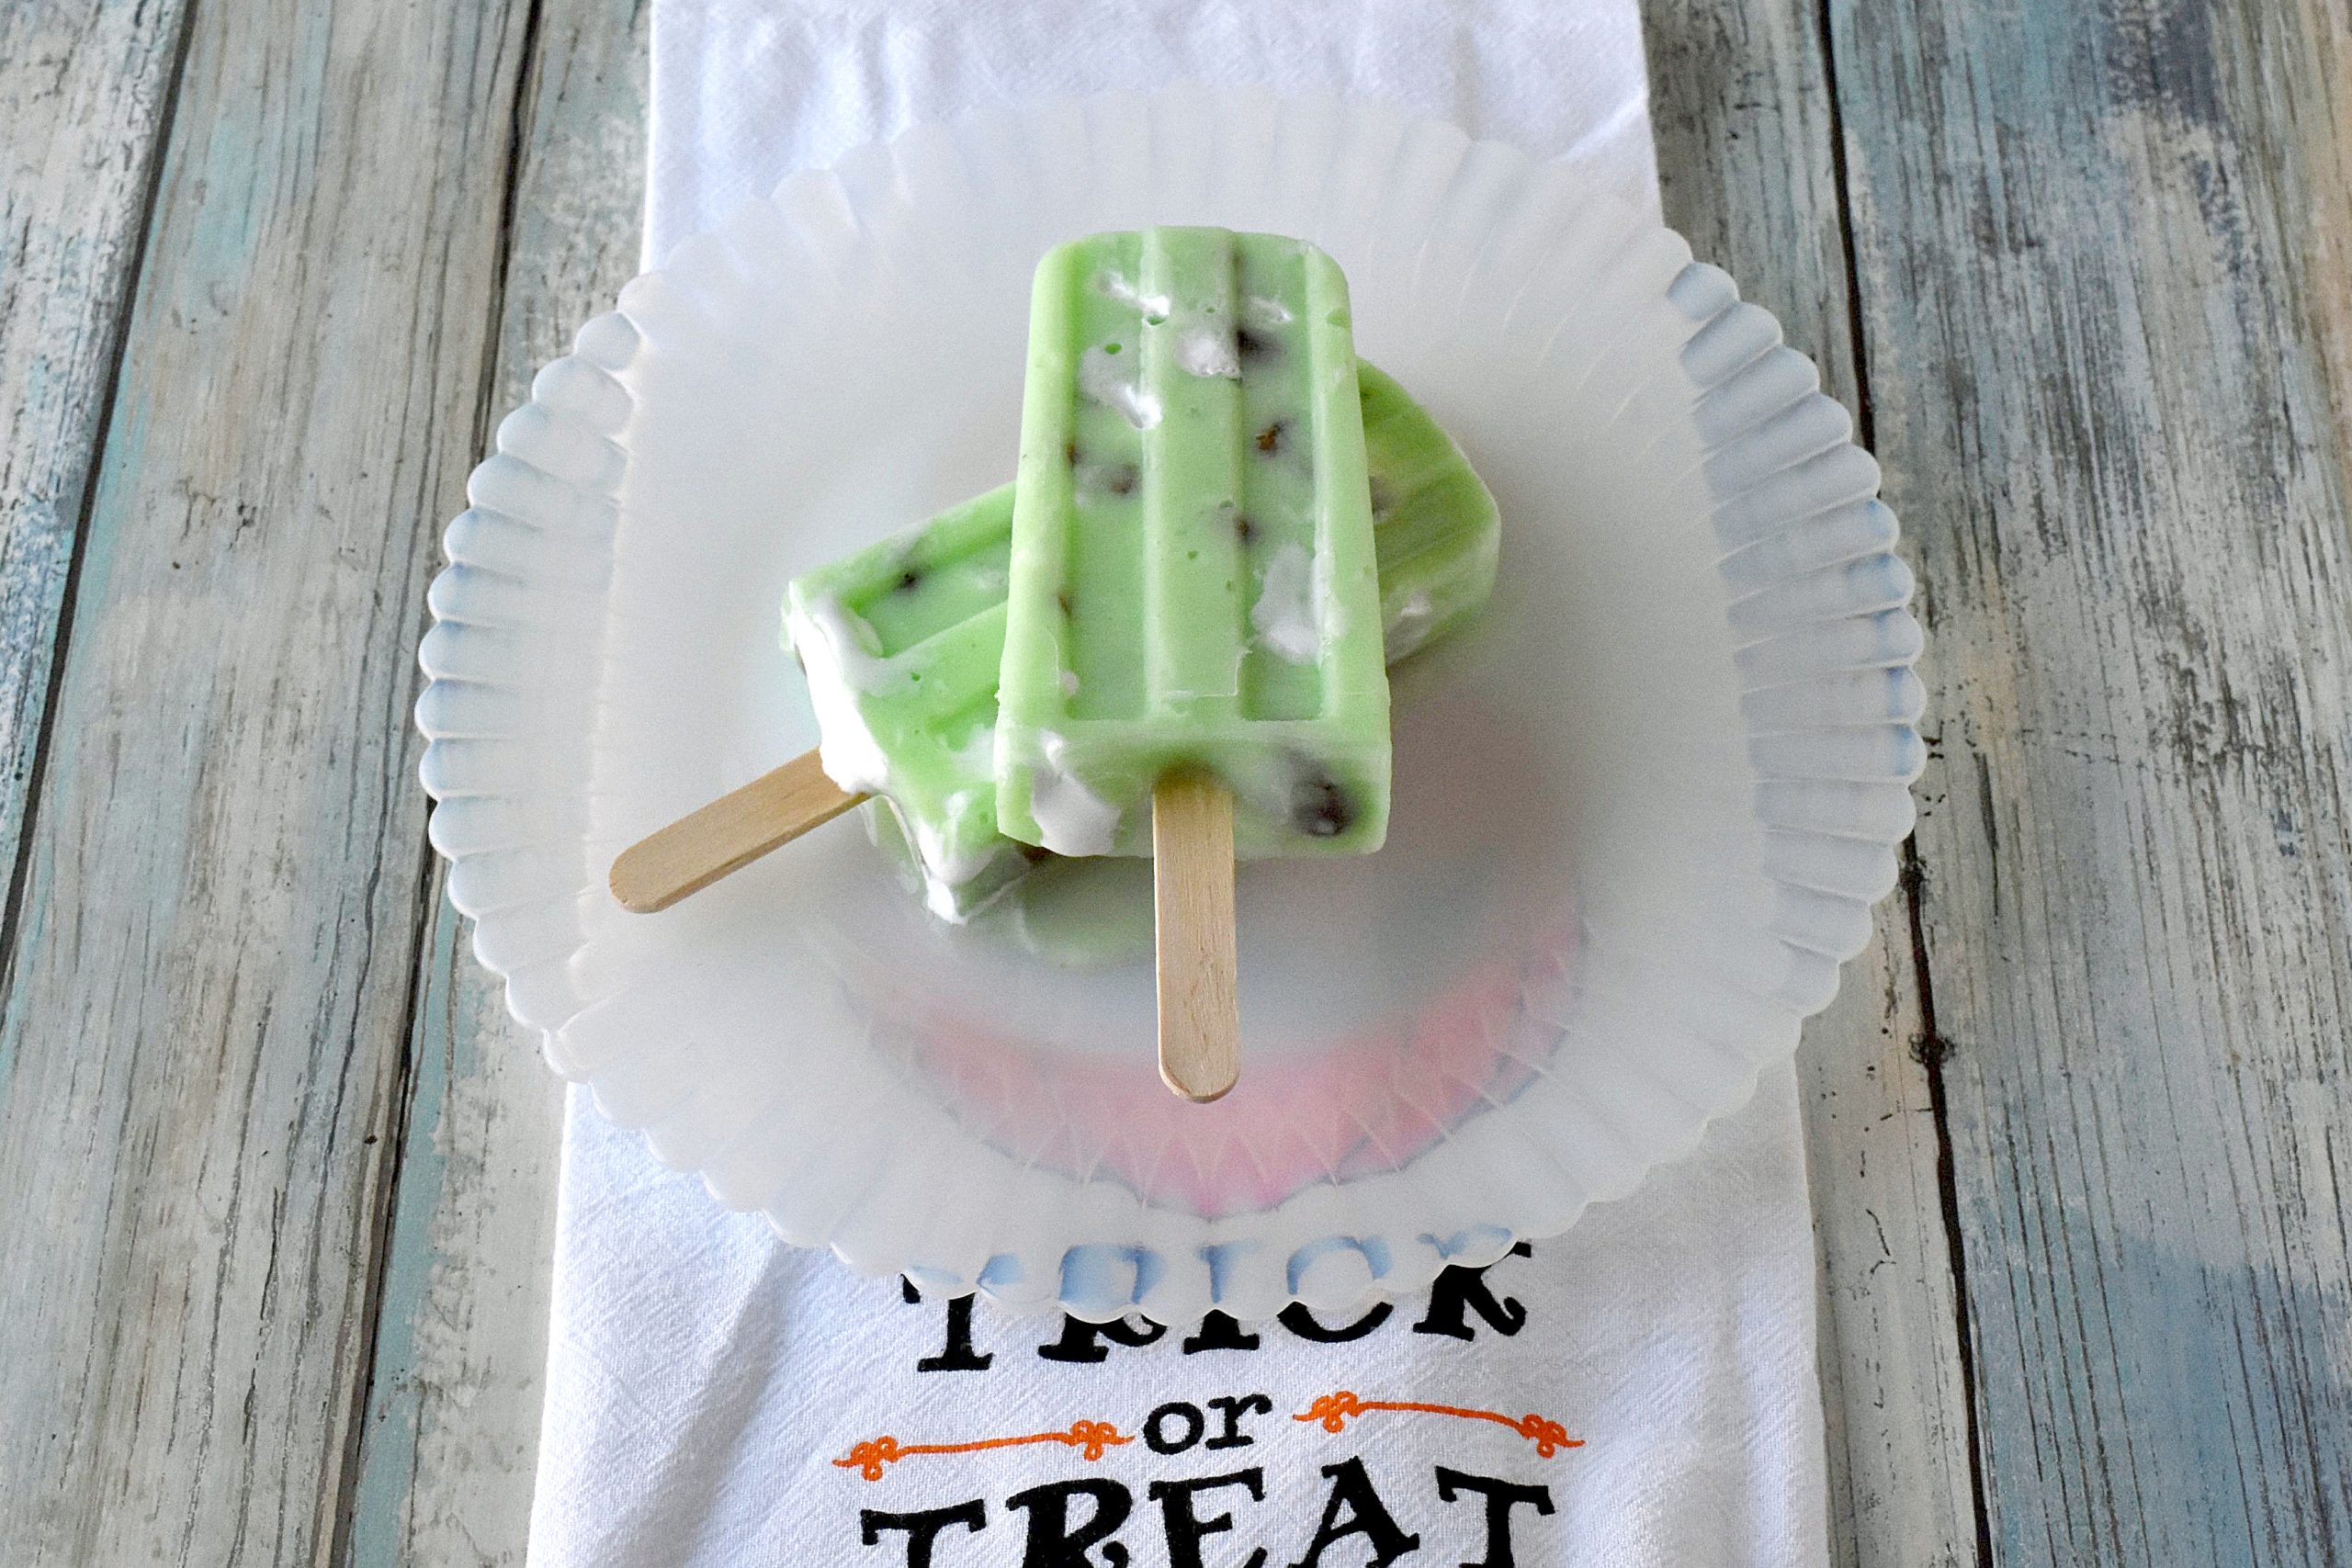 Wicked Witch Popsicles are fun and delicious! Made with pistachio pudding, marshmallow fluff, and pistachios, they are simple and simply delicious. #HalloweenTreatsWeek